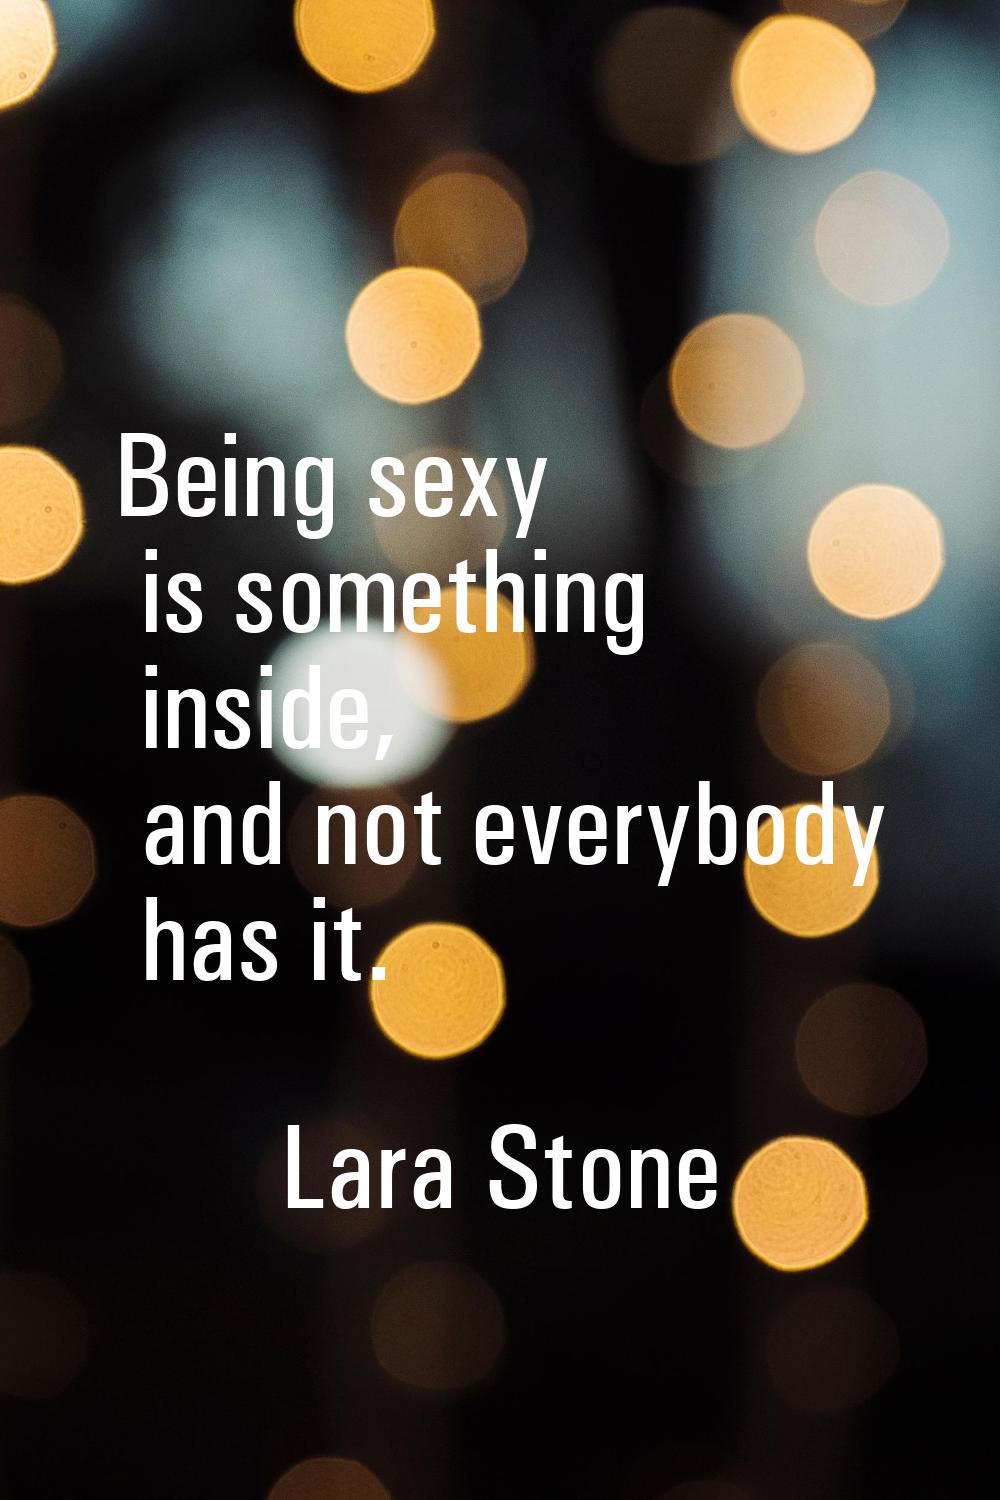 Being sexy is something inside, and not everybody has it.